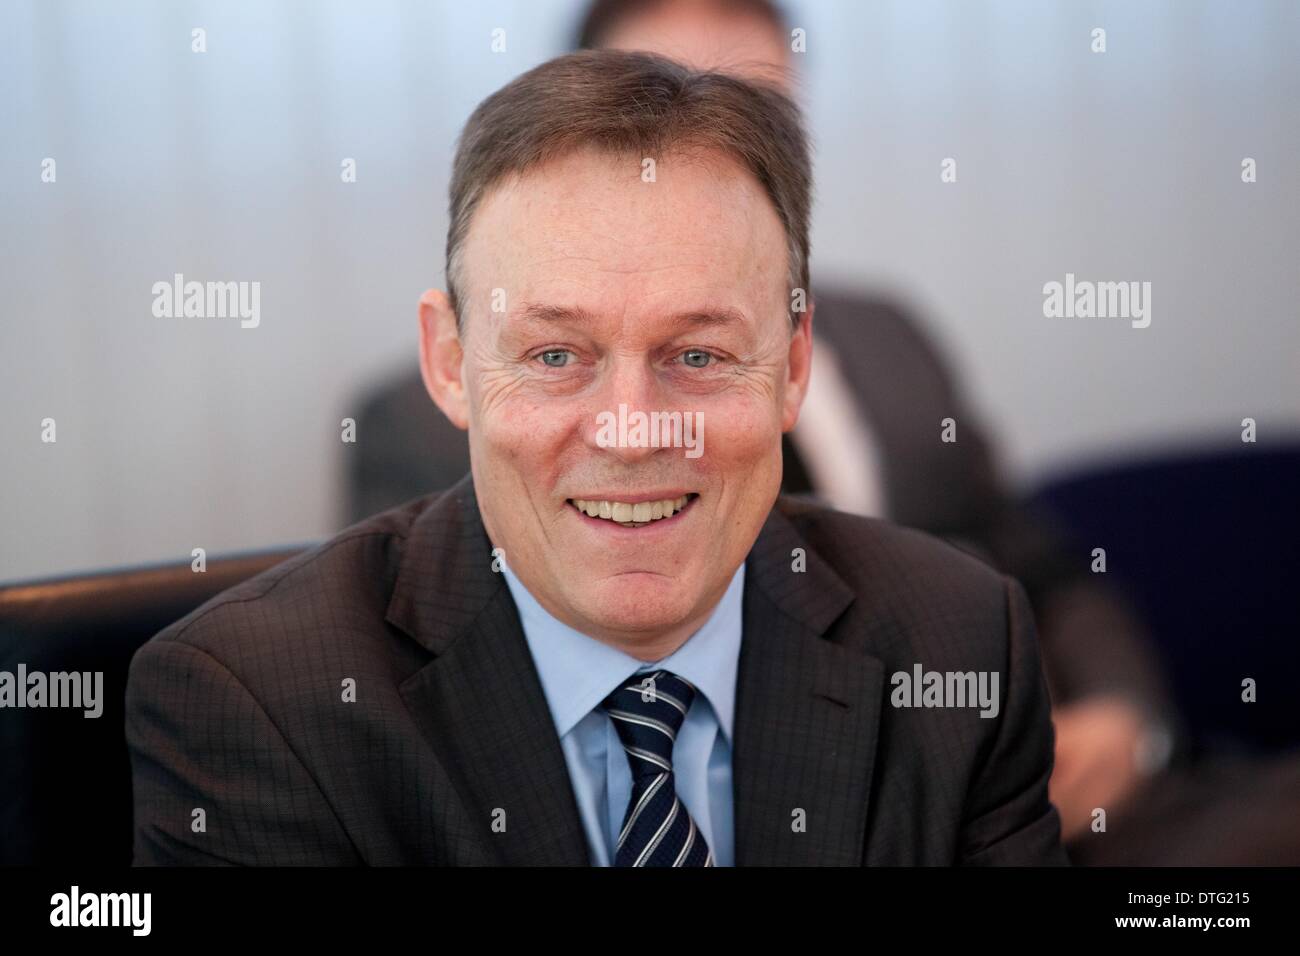 Berlin, Germany. 17th Feb, 2014. SPD party leadership meeting at Willy Brandt Haus in Berlin. / Picture: Thomas Oppermann (SPD), Lider of the SPD Parliamentary Group. Credit:  Reynaldo Paganelli/NurPhoto/ZUMAPRESS.com/Alamy Live News Stock Photo